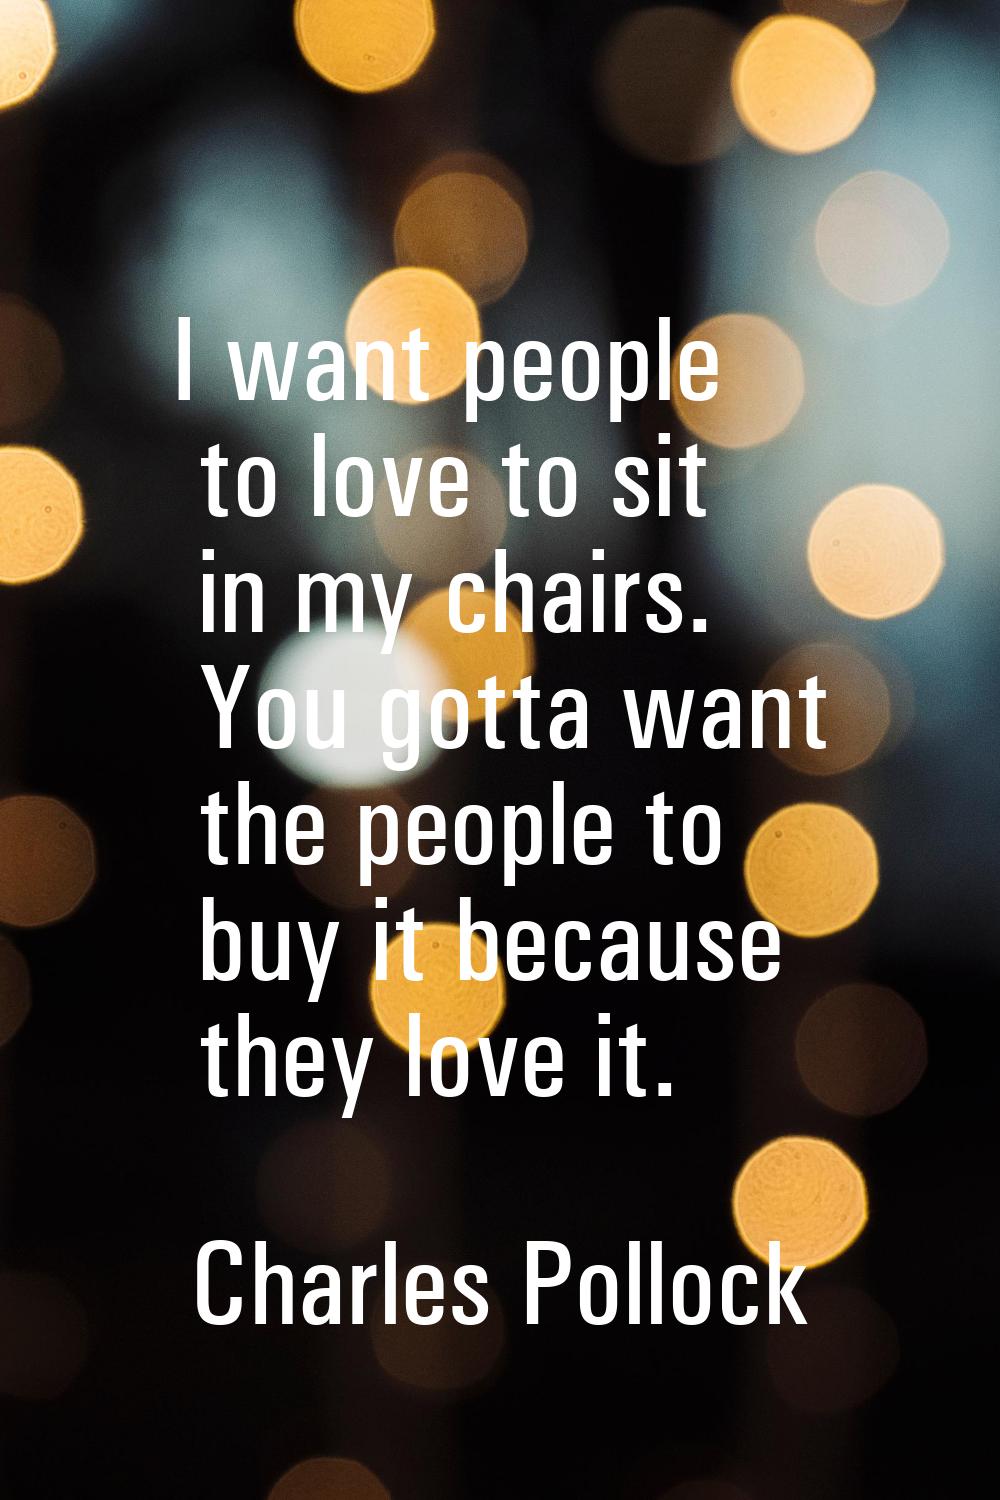 I want people to love to sit in my chairs. You gotta want the people to buy it because they love it